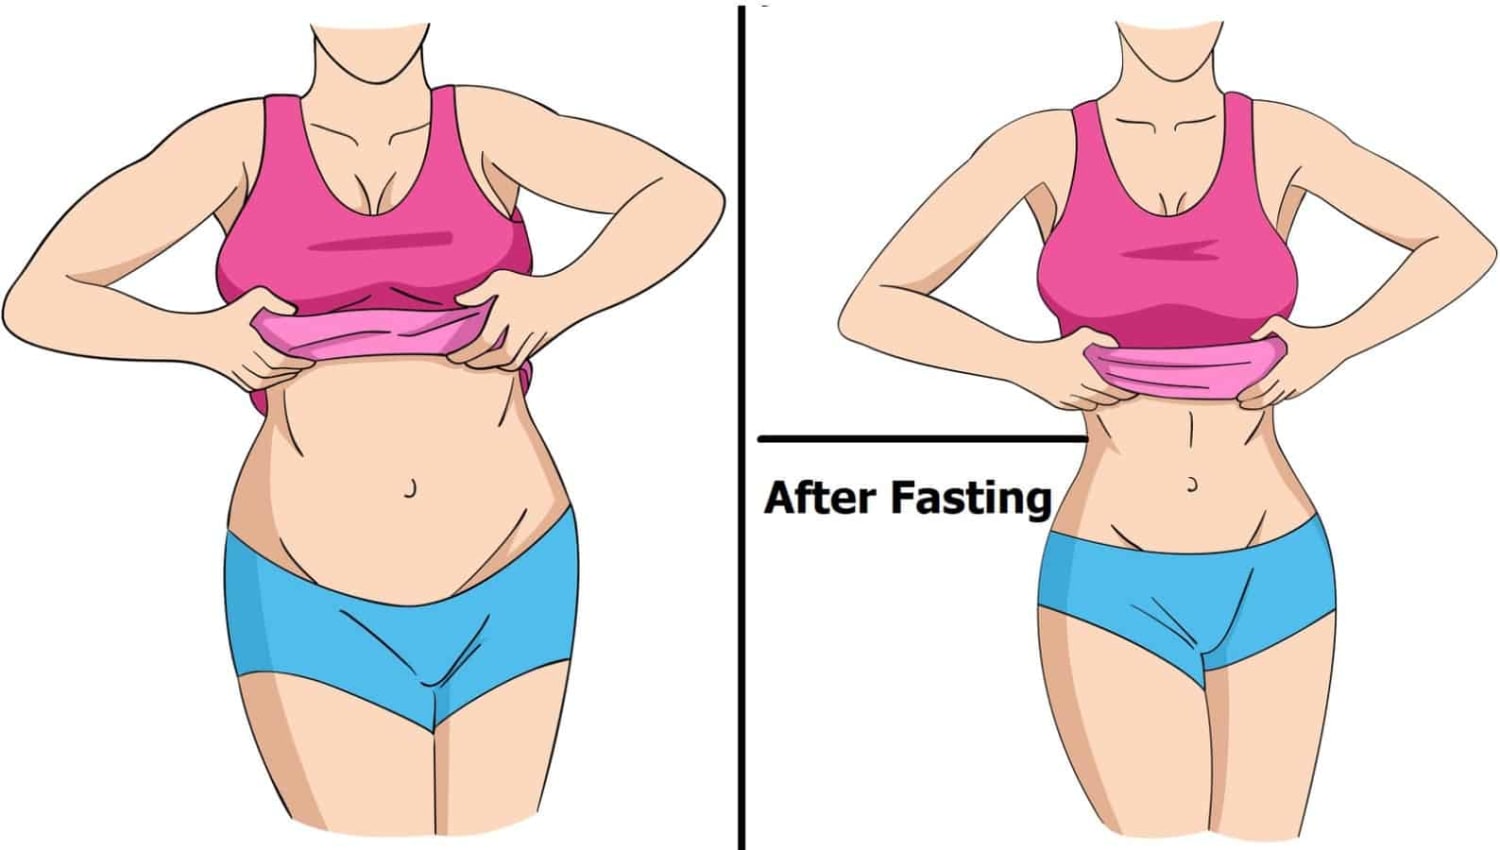 Science Explains How Fasting Helps You Lose Weight And Strengthen Your Body